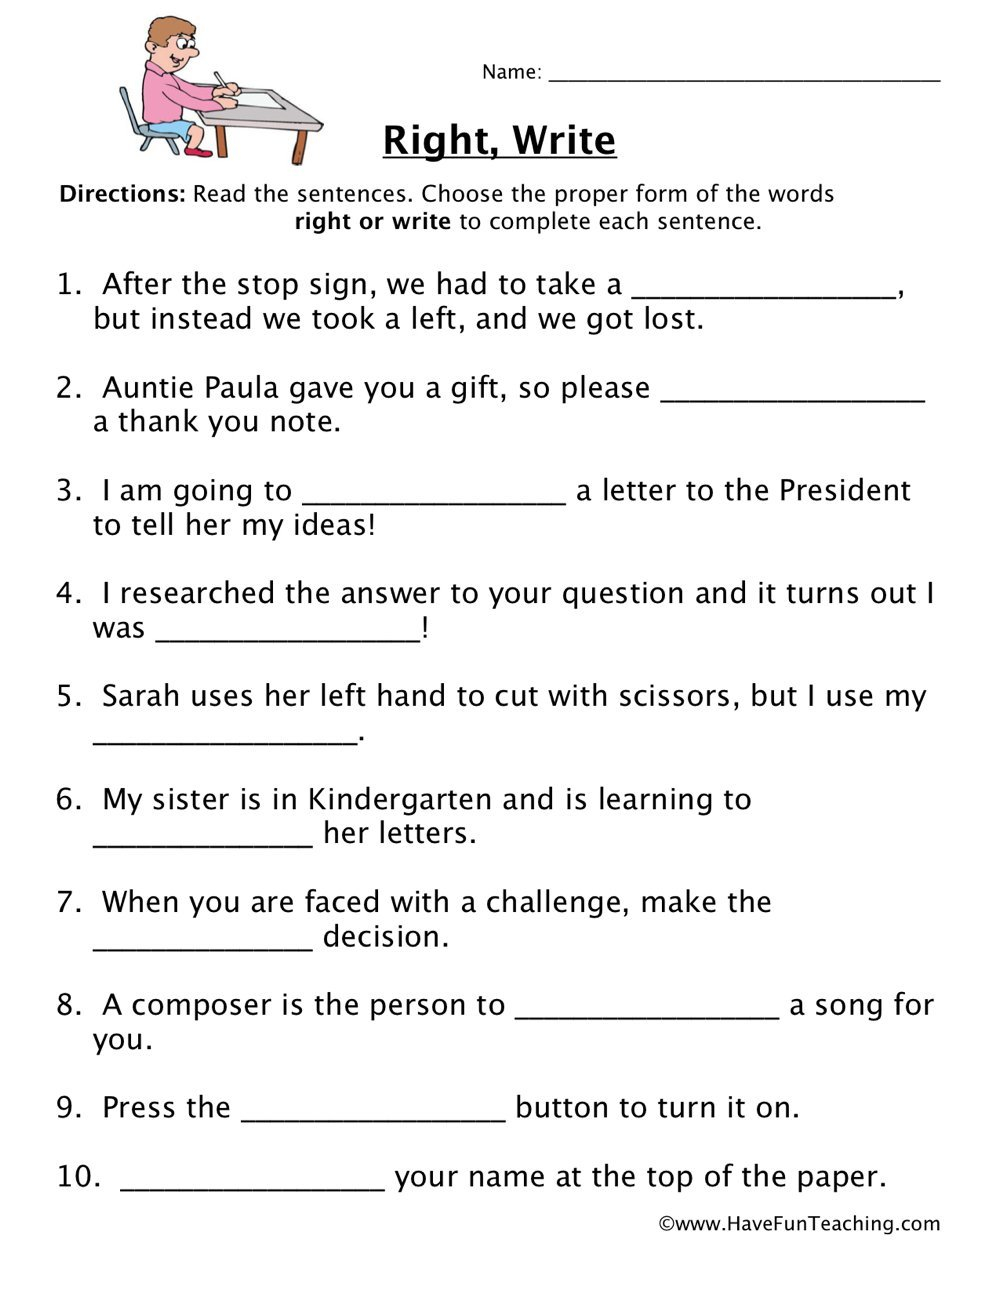 Worksheet Want To Learn English Short Moral Stories For Kids Or Learning English Worksheets